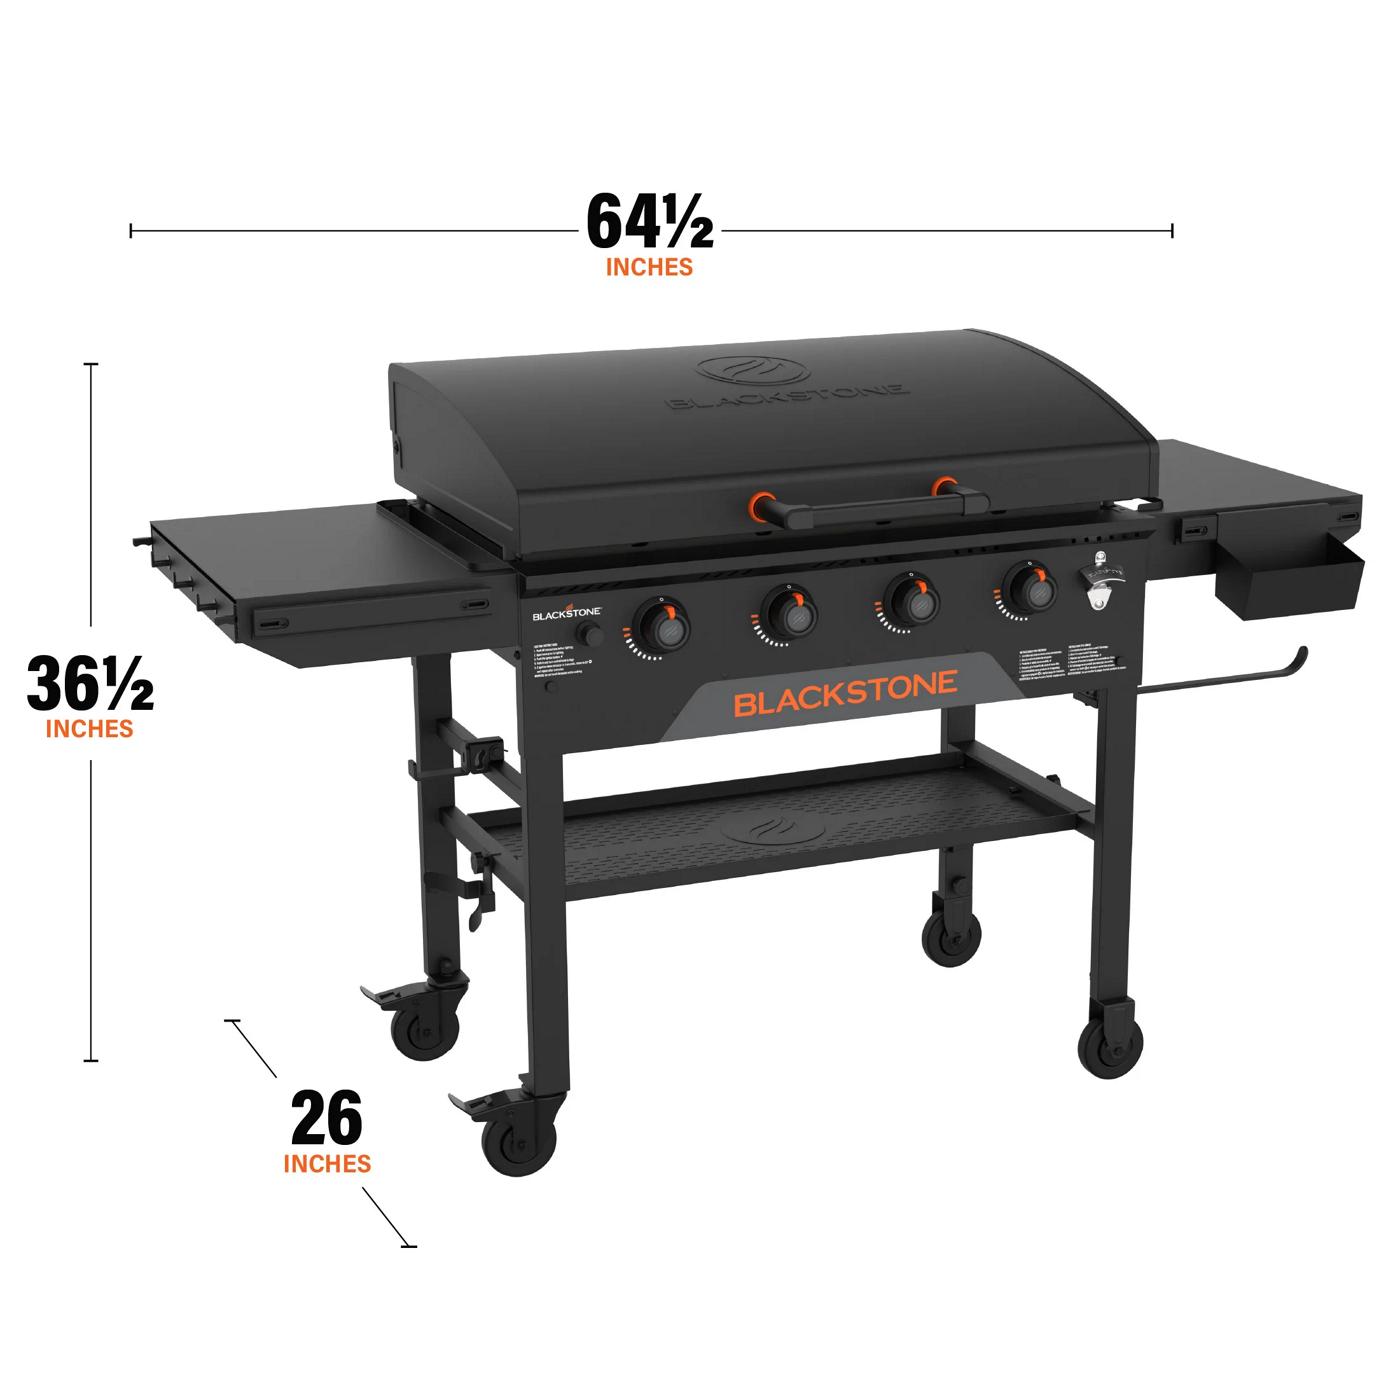 Blackstone Omnivore Griddle with Hood; image 2 of 8